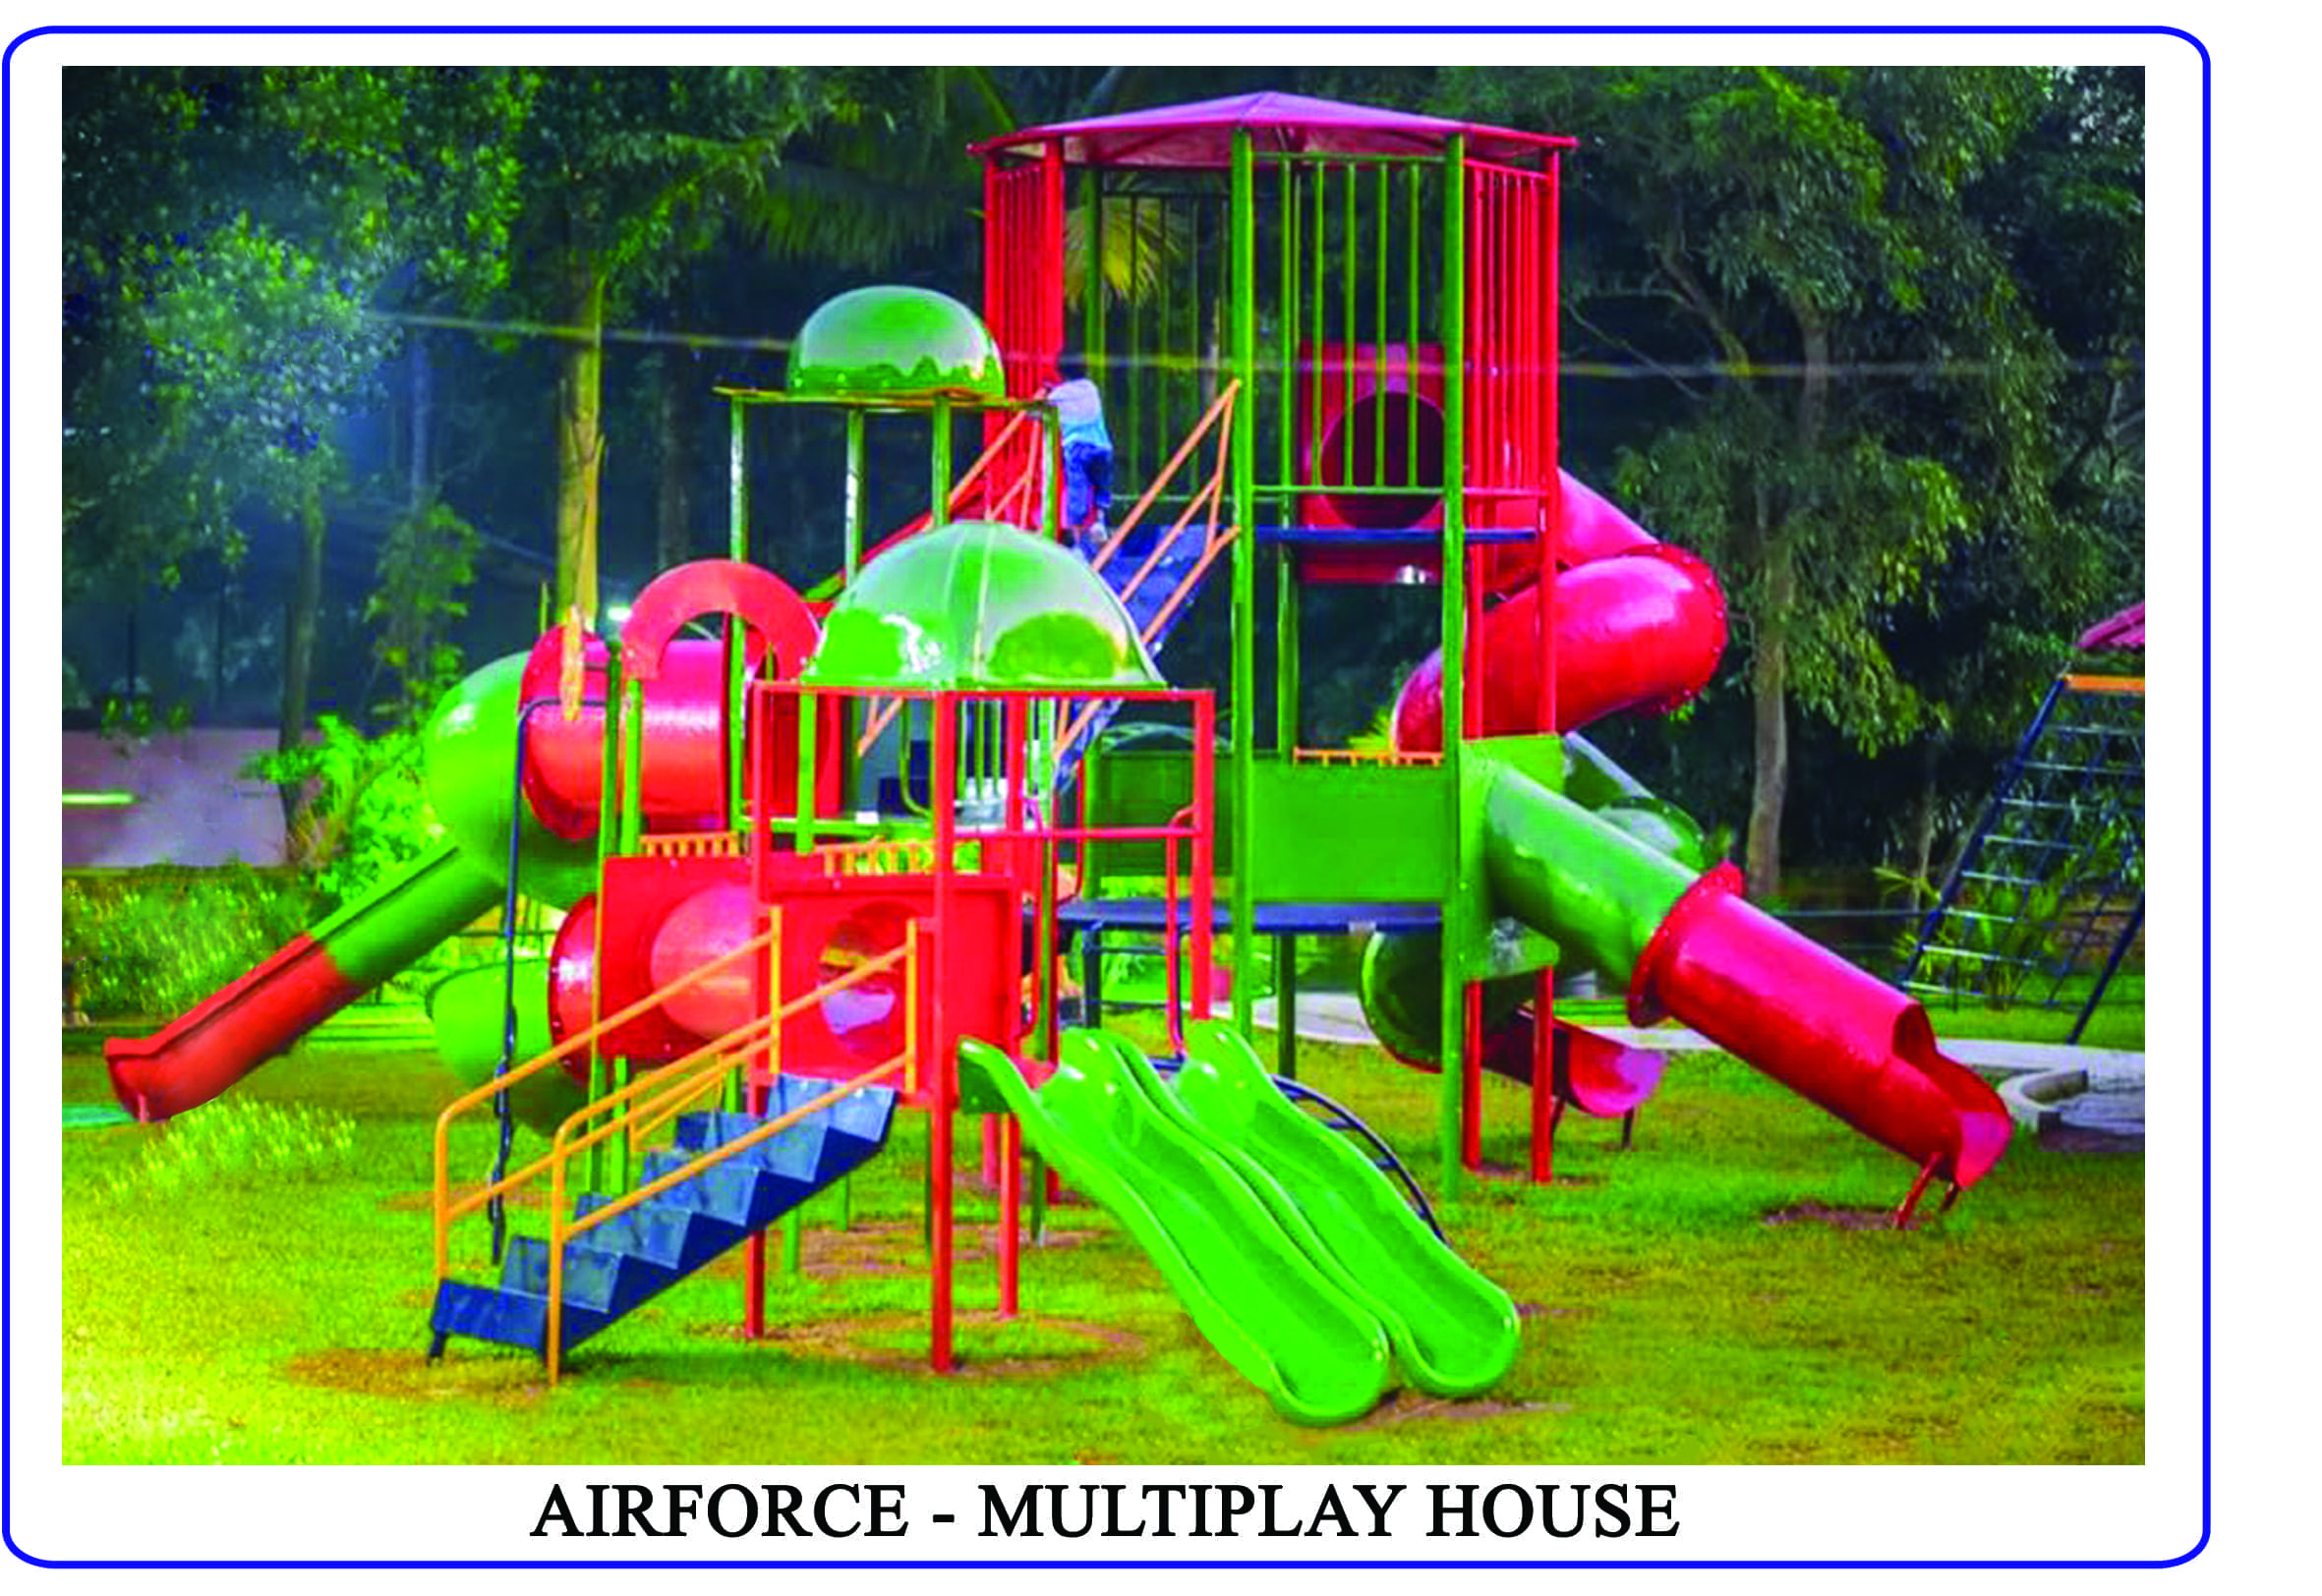 UNITED AIRFORCE - MULTIPLAY HOUSE